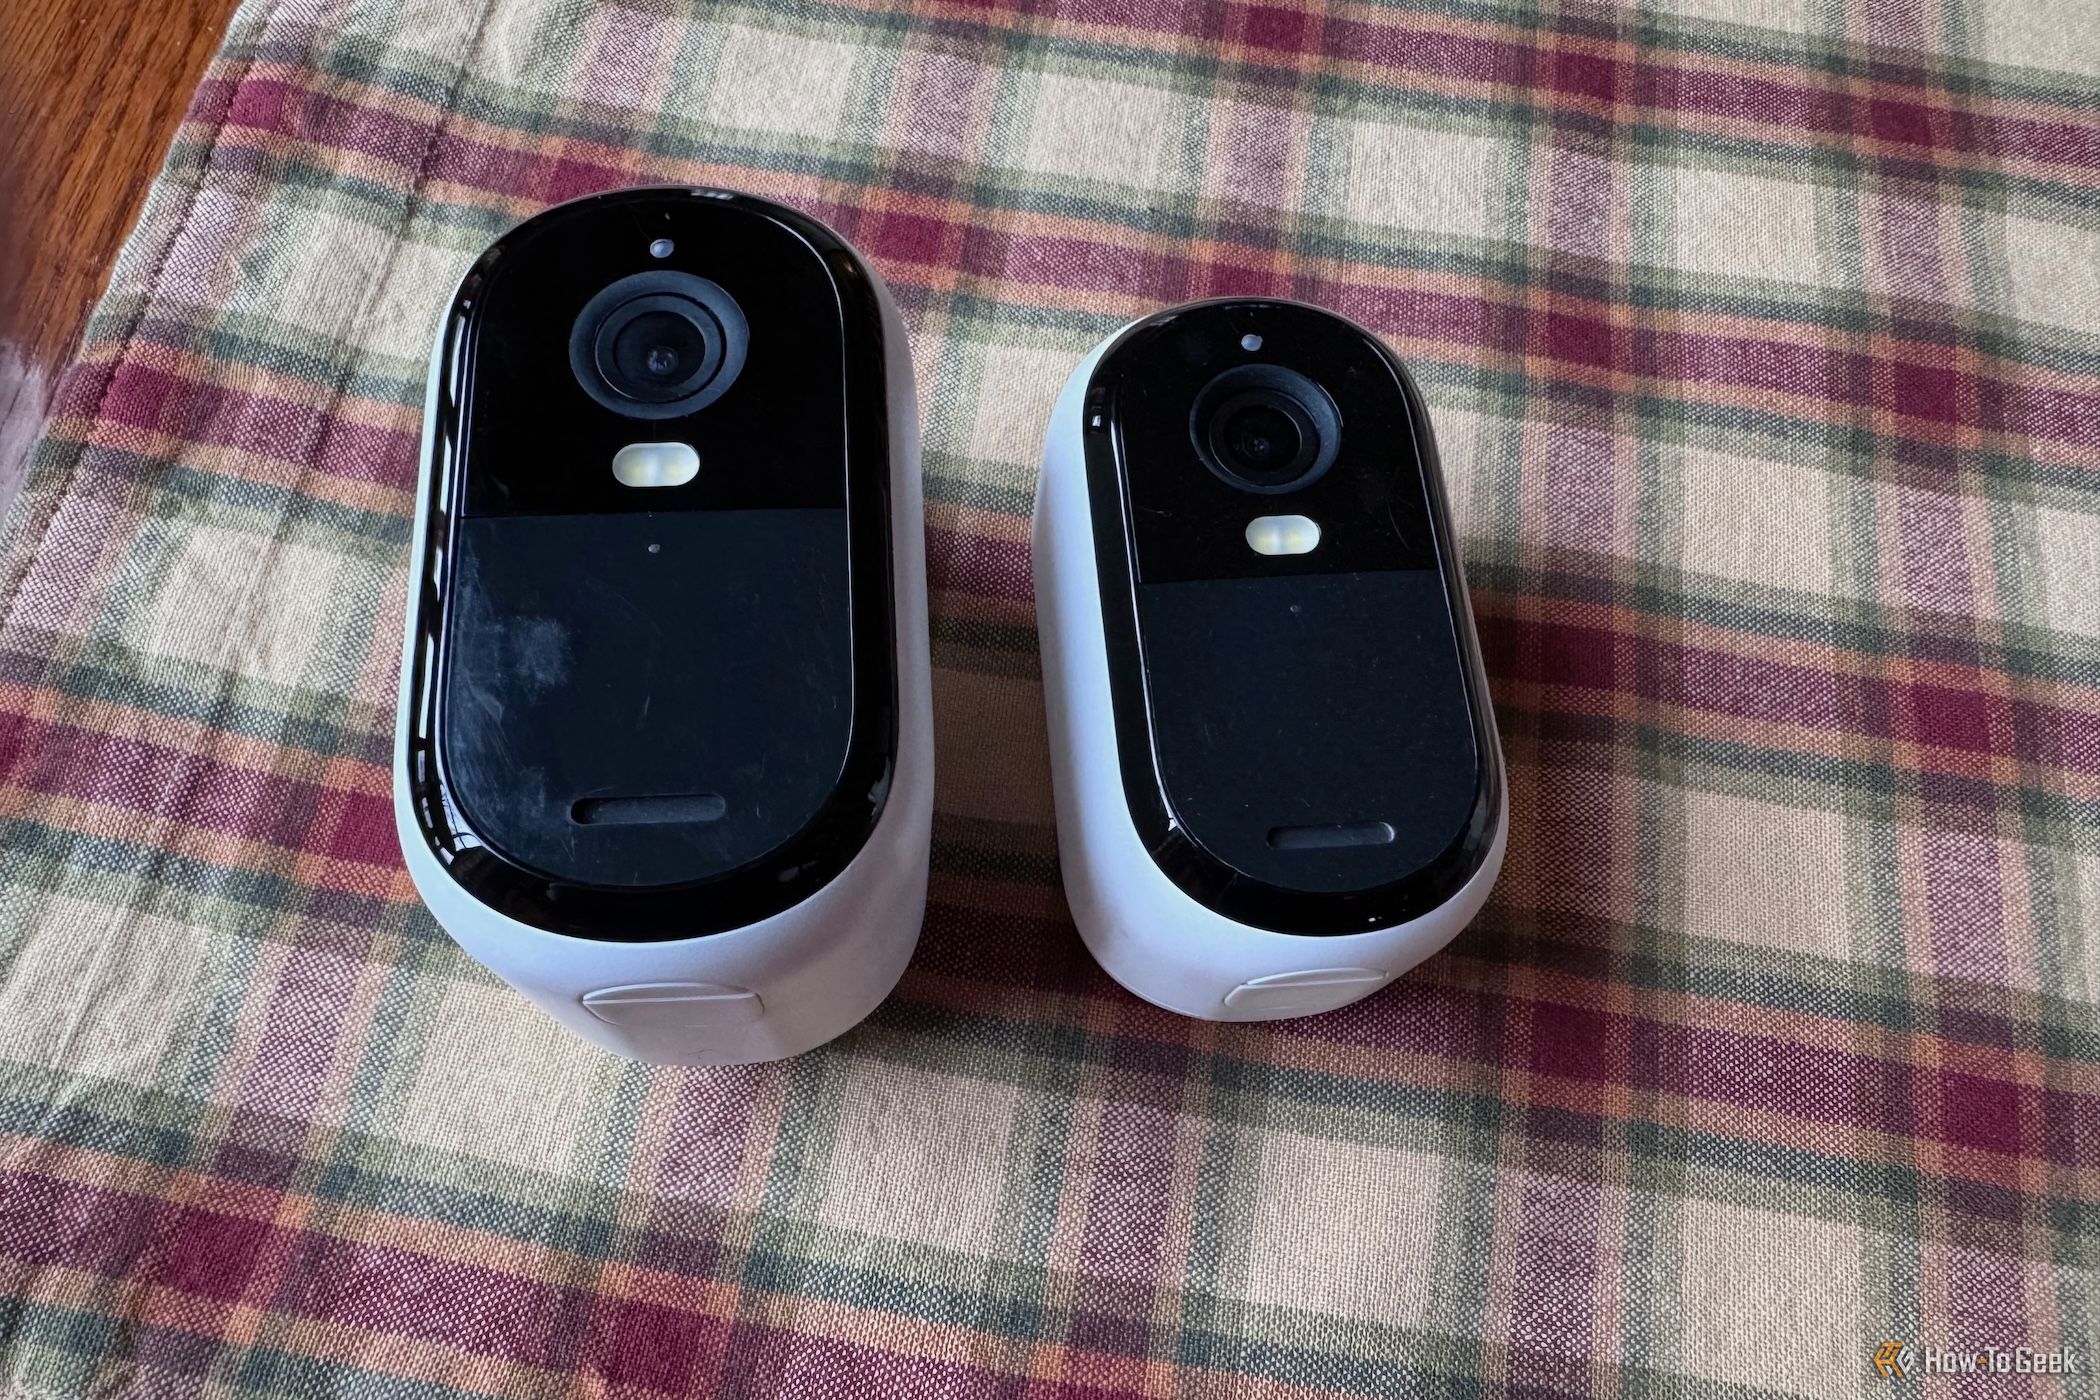 Comparison between the Arlo Essential XL and Arlo Essential security cameras (2nd generation)